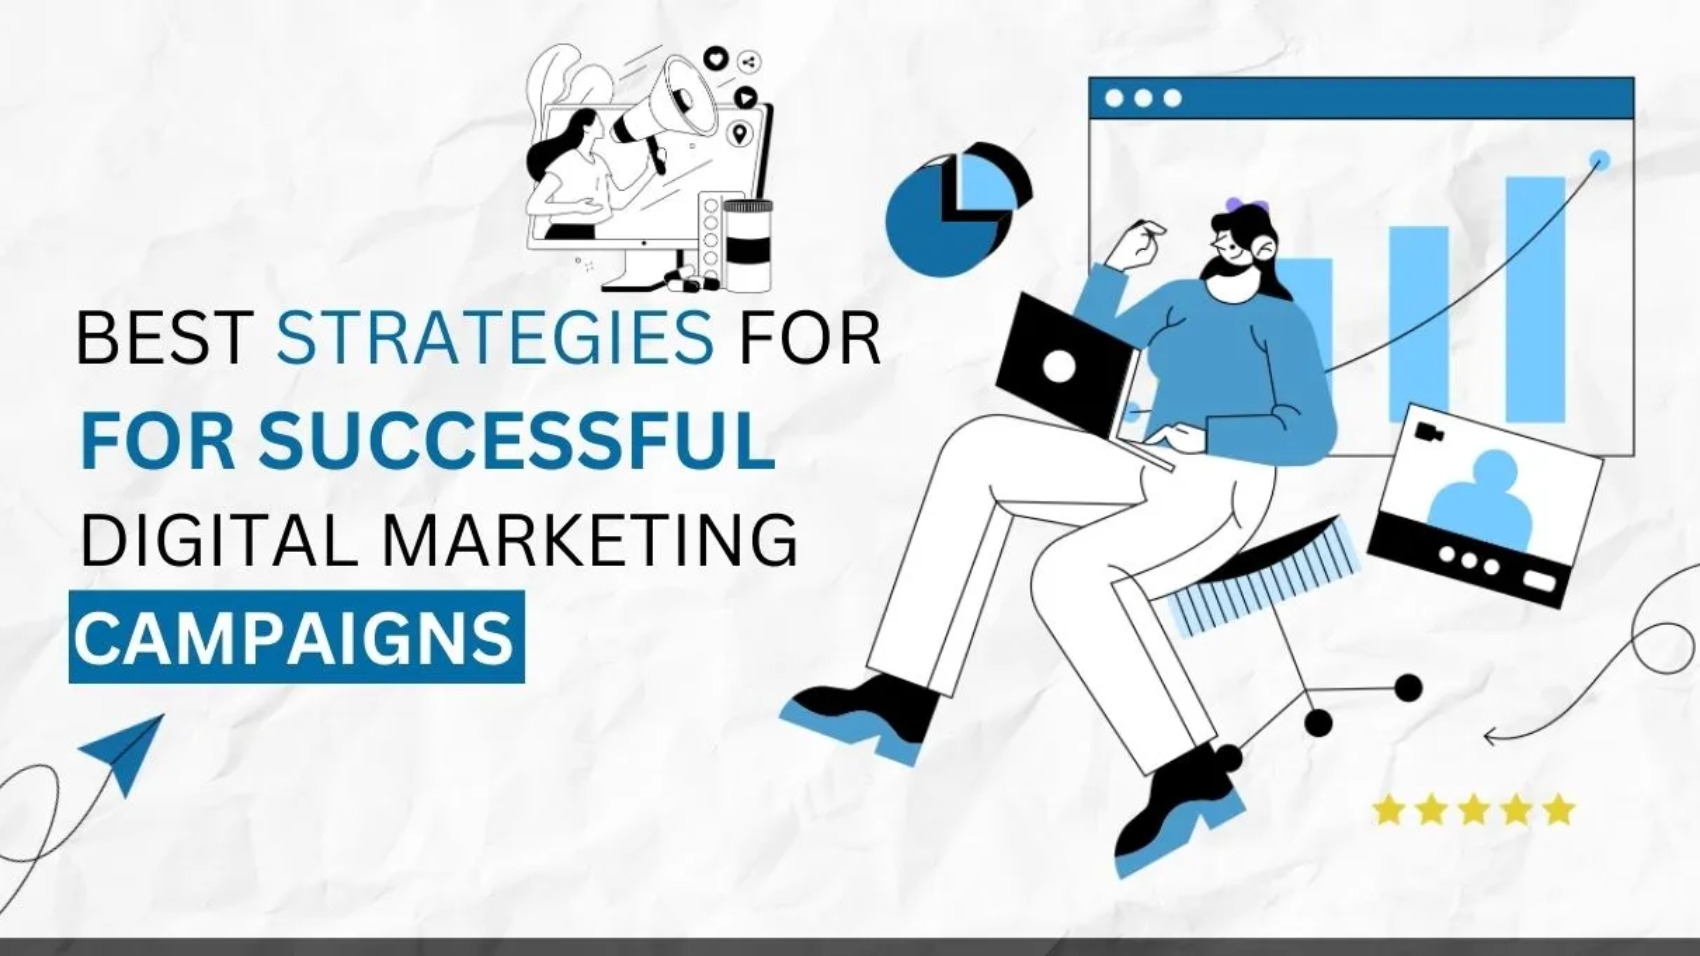 Best Strategies for Successful Digital Marketing Campaigns